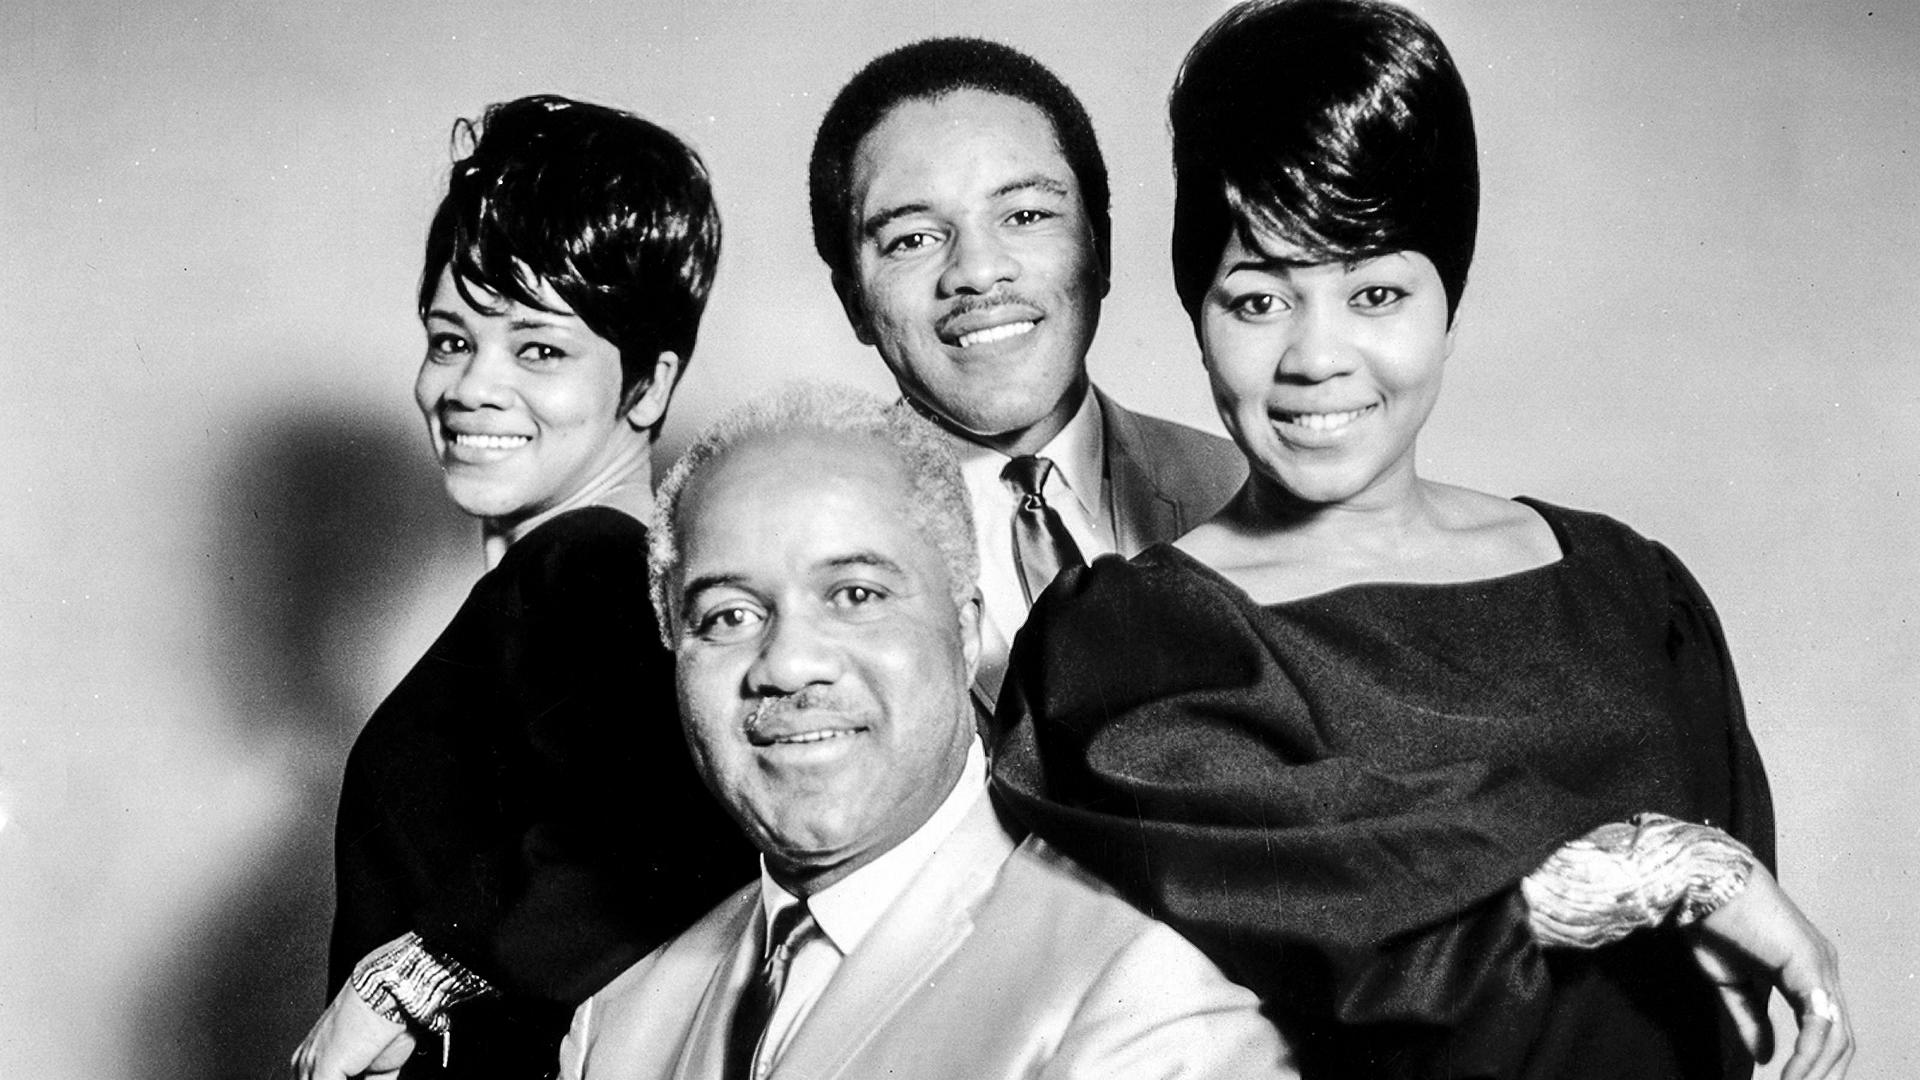 The Staple Singers (above) were active in the US civil rights movement. Their live album Freedom Highway failed commercially when it was released in 1965, but has now been remastered and reissued (below).